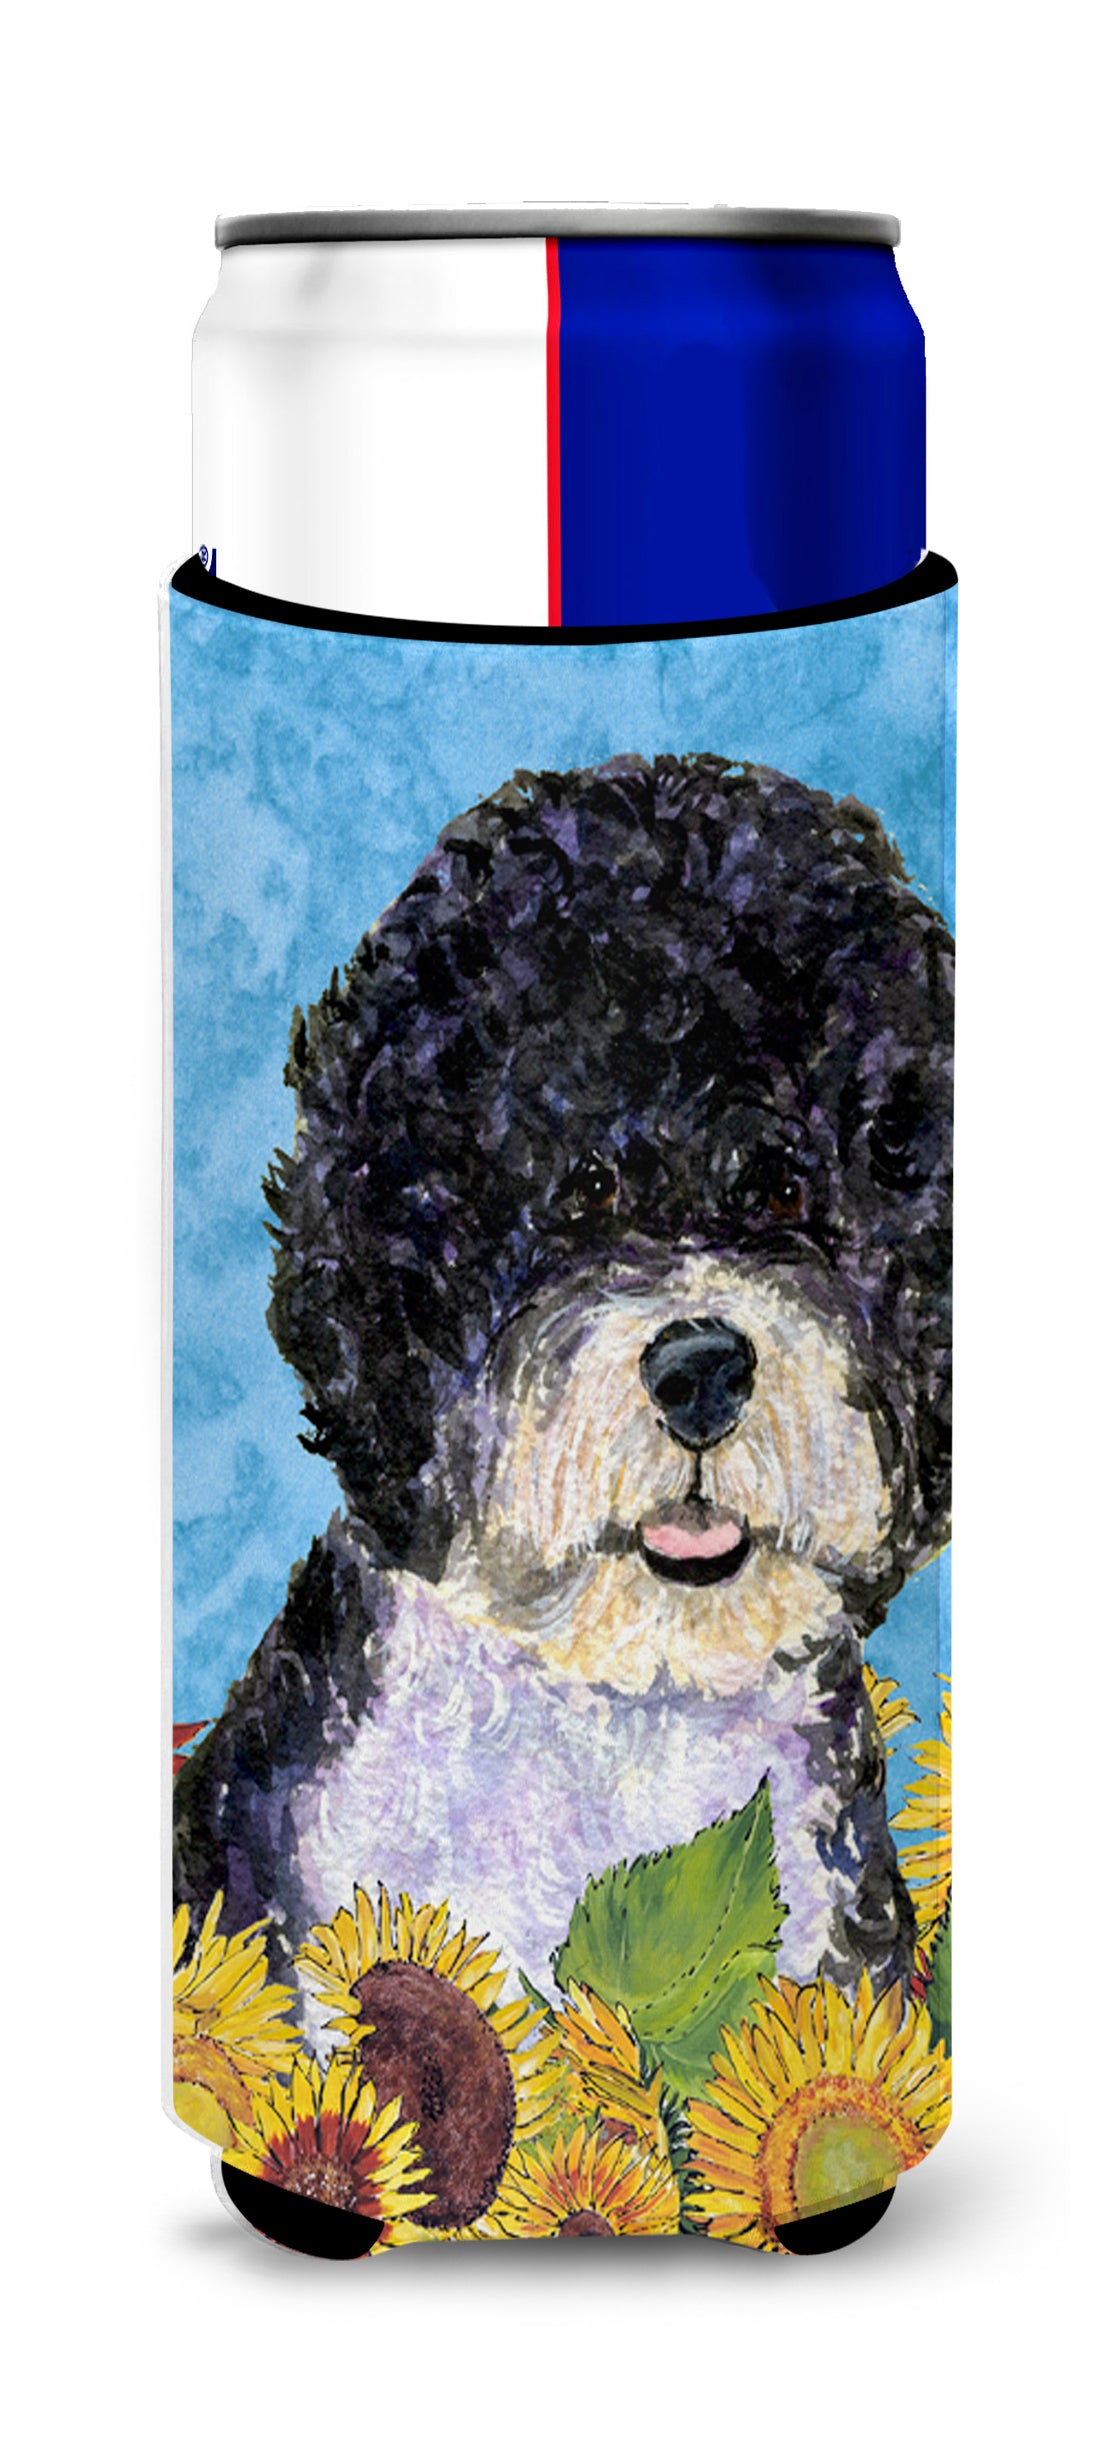 Portuguese Water Dog in Summer Flowers Ultra Beverage Insulators for slim cans SS4124MUK.